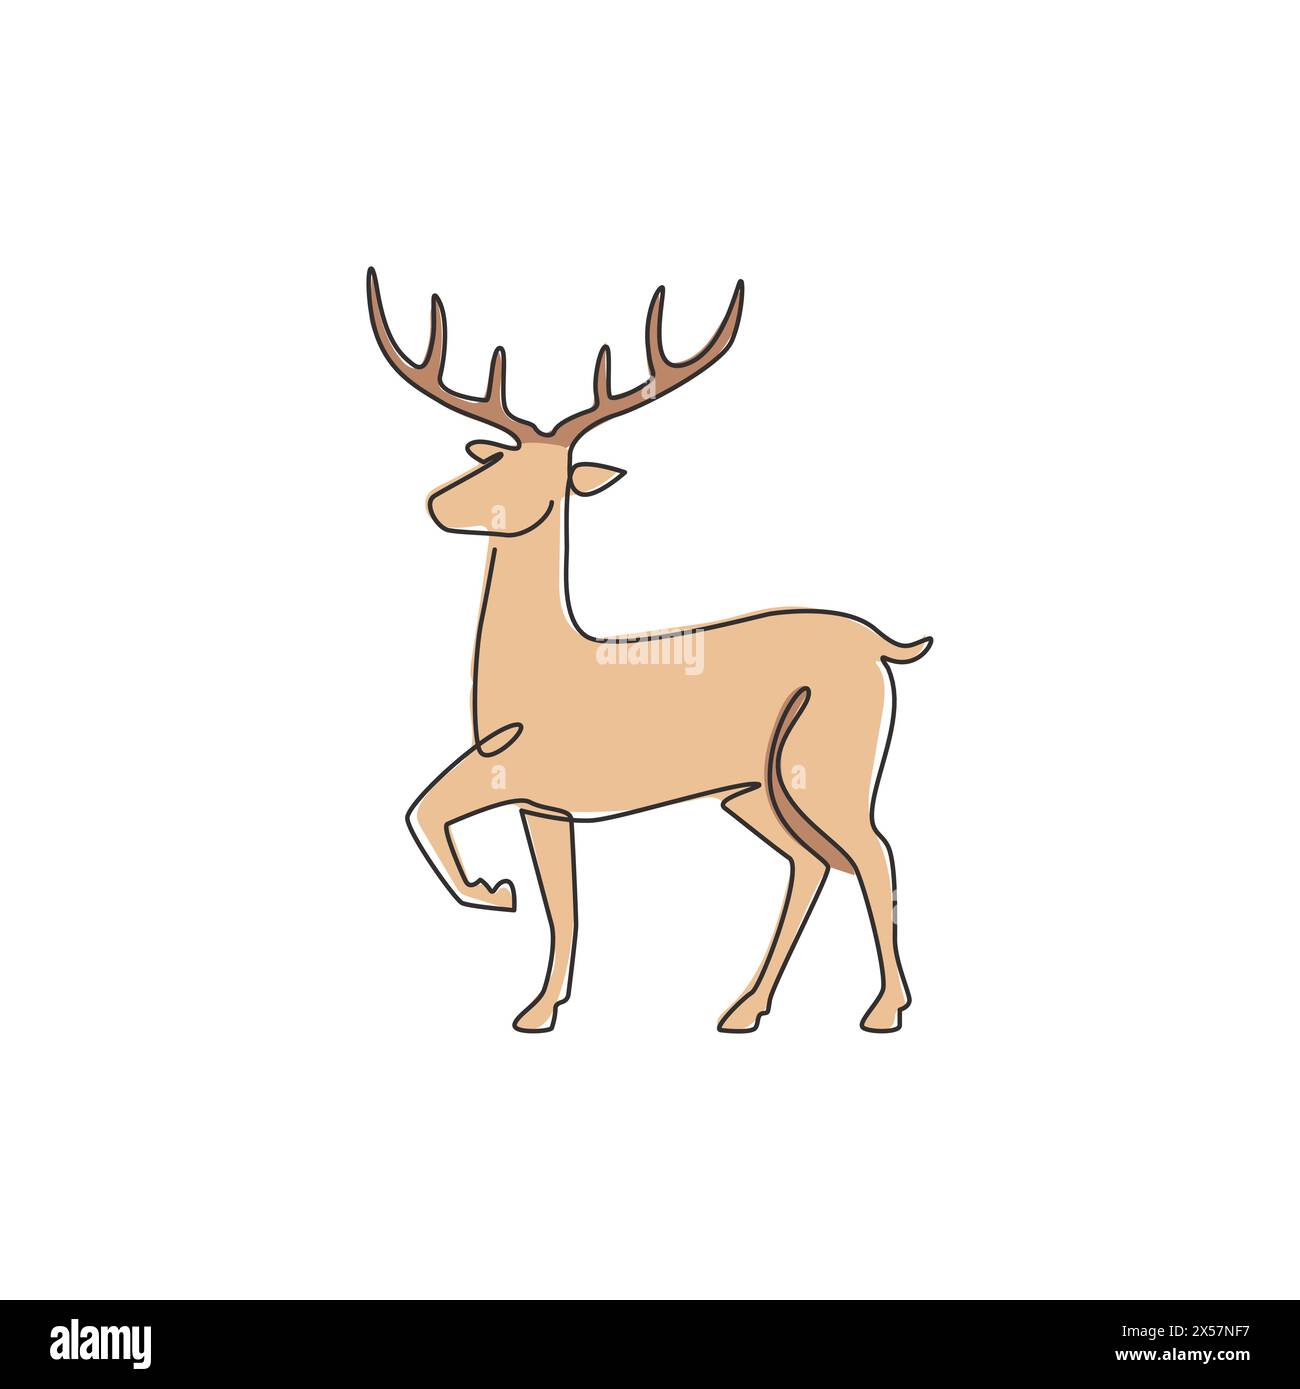 One single line drawing of adorable funny deer for company logo identity. Cute reindeer mammal animal mascot concept for public zoo. Modern continuous Stock Vector